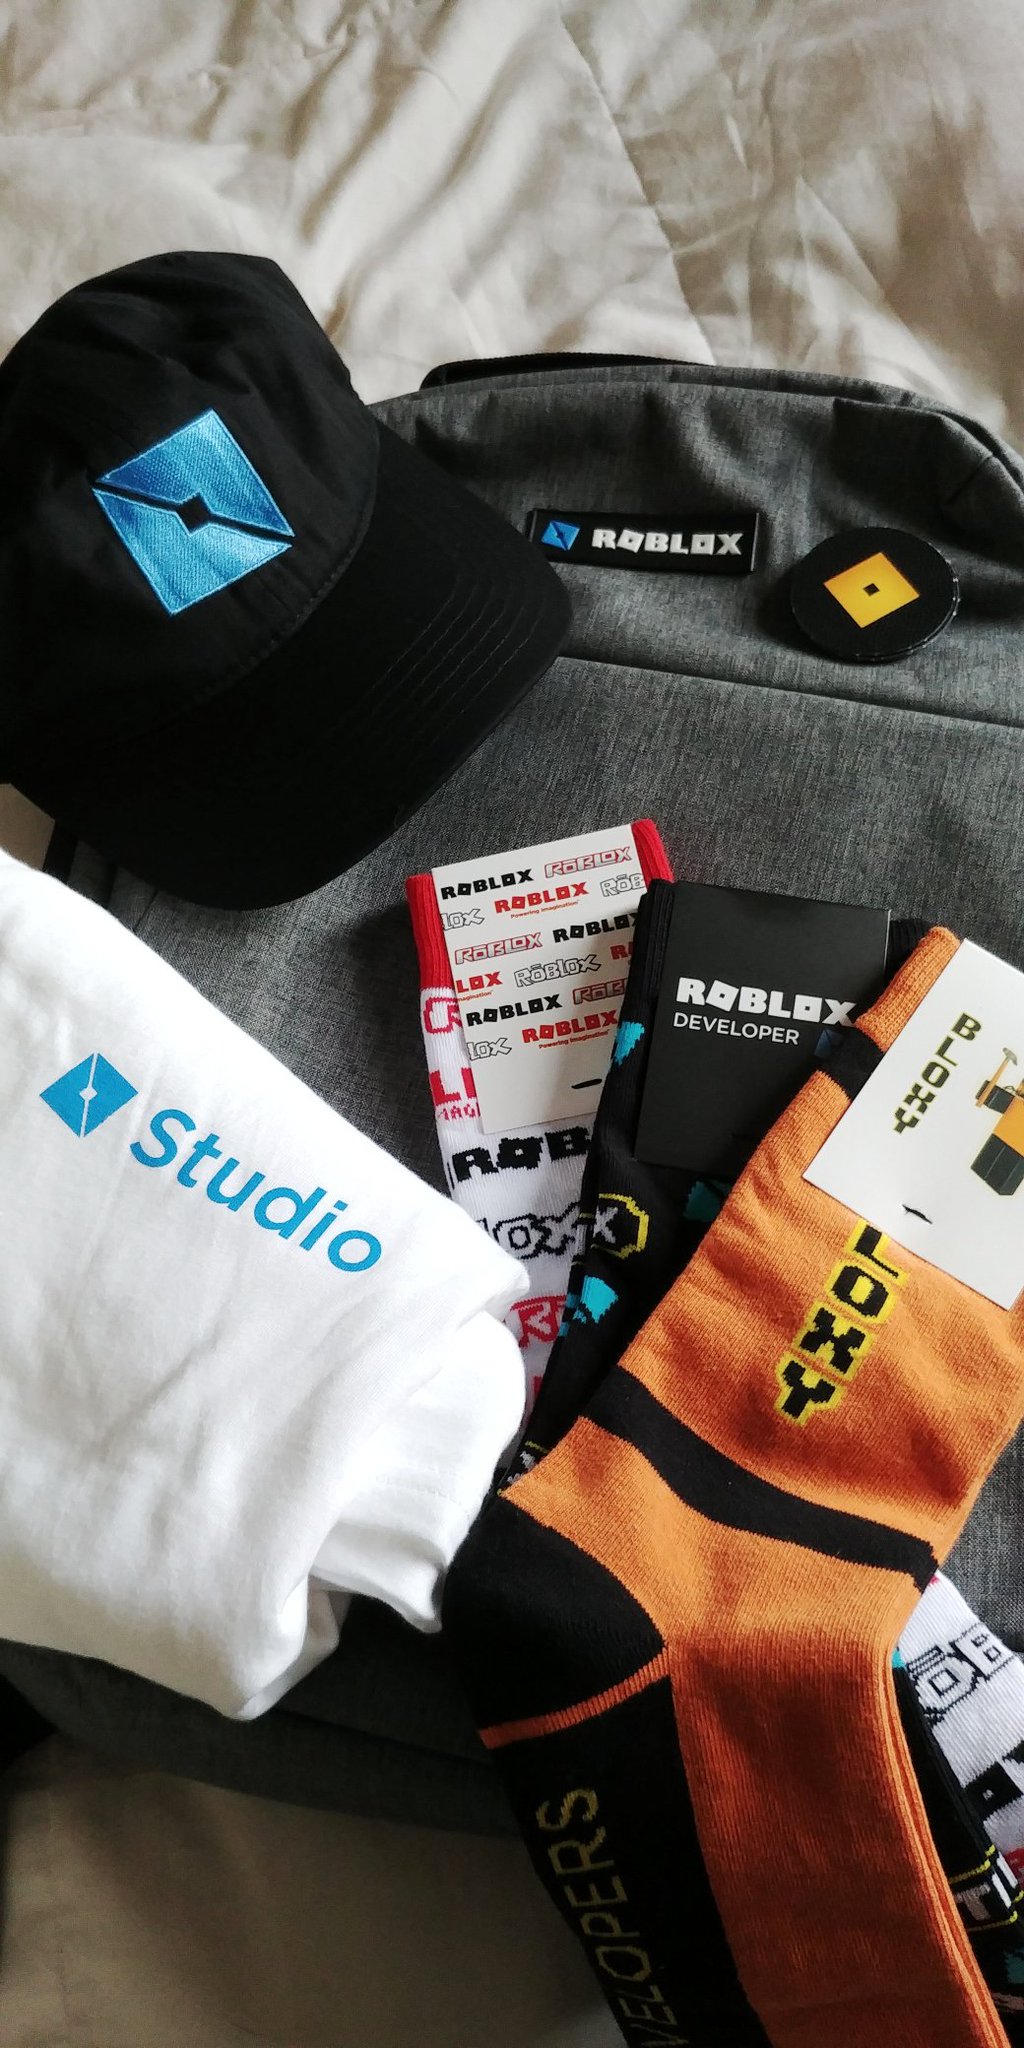 CoffeeNerd ☕ on X: Just got my swag bag from @Roblox The hoodie